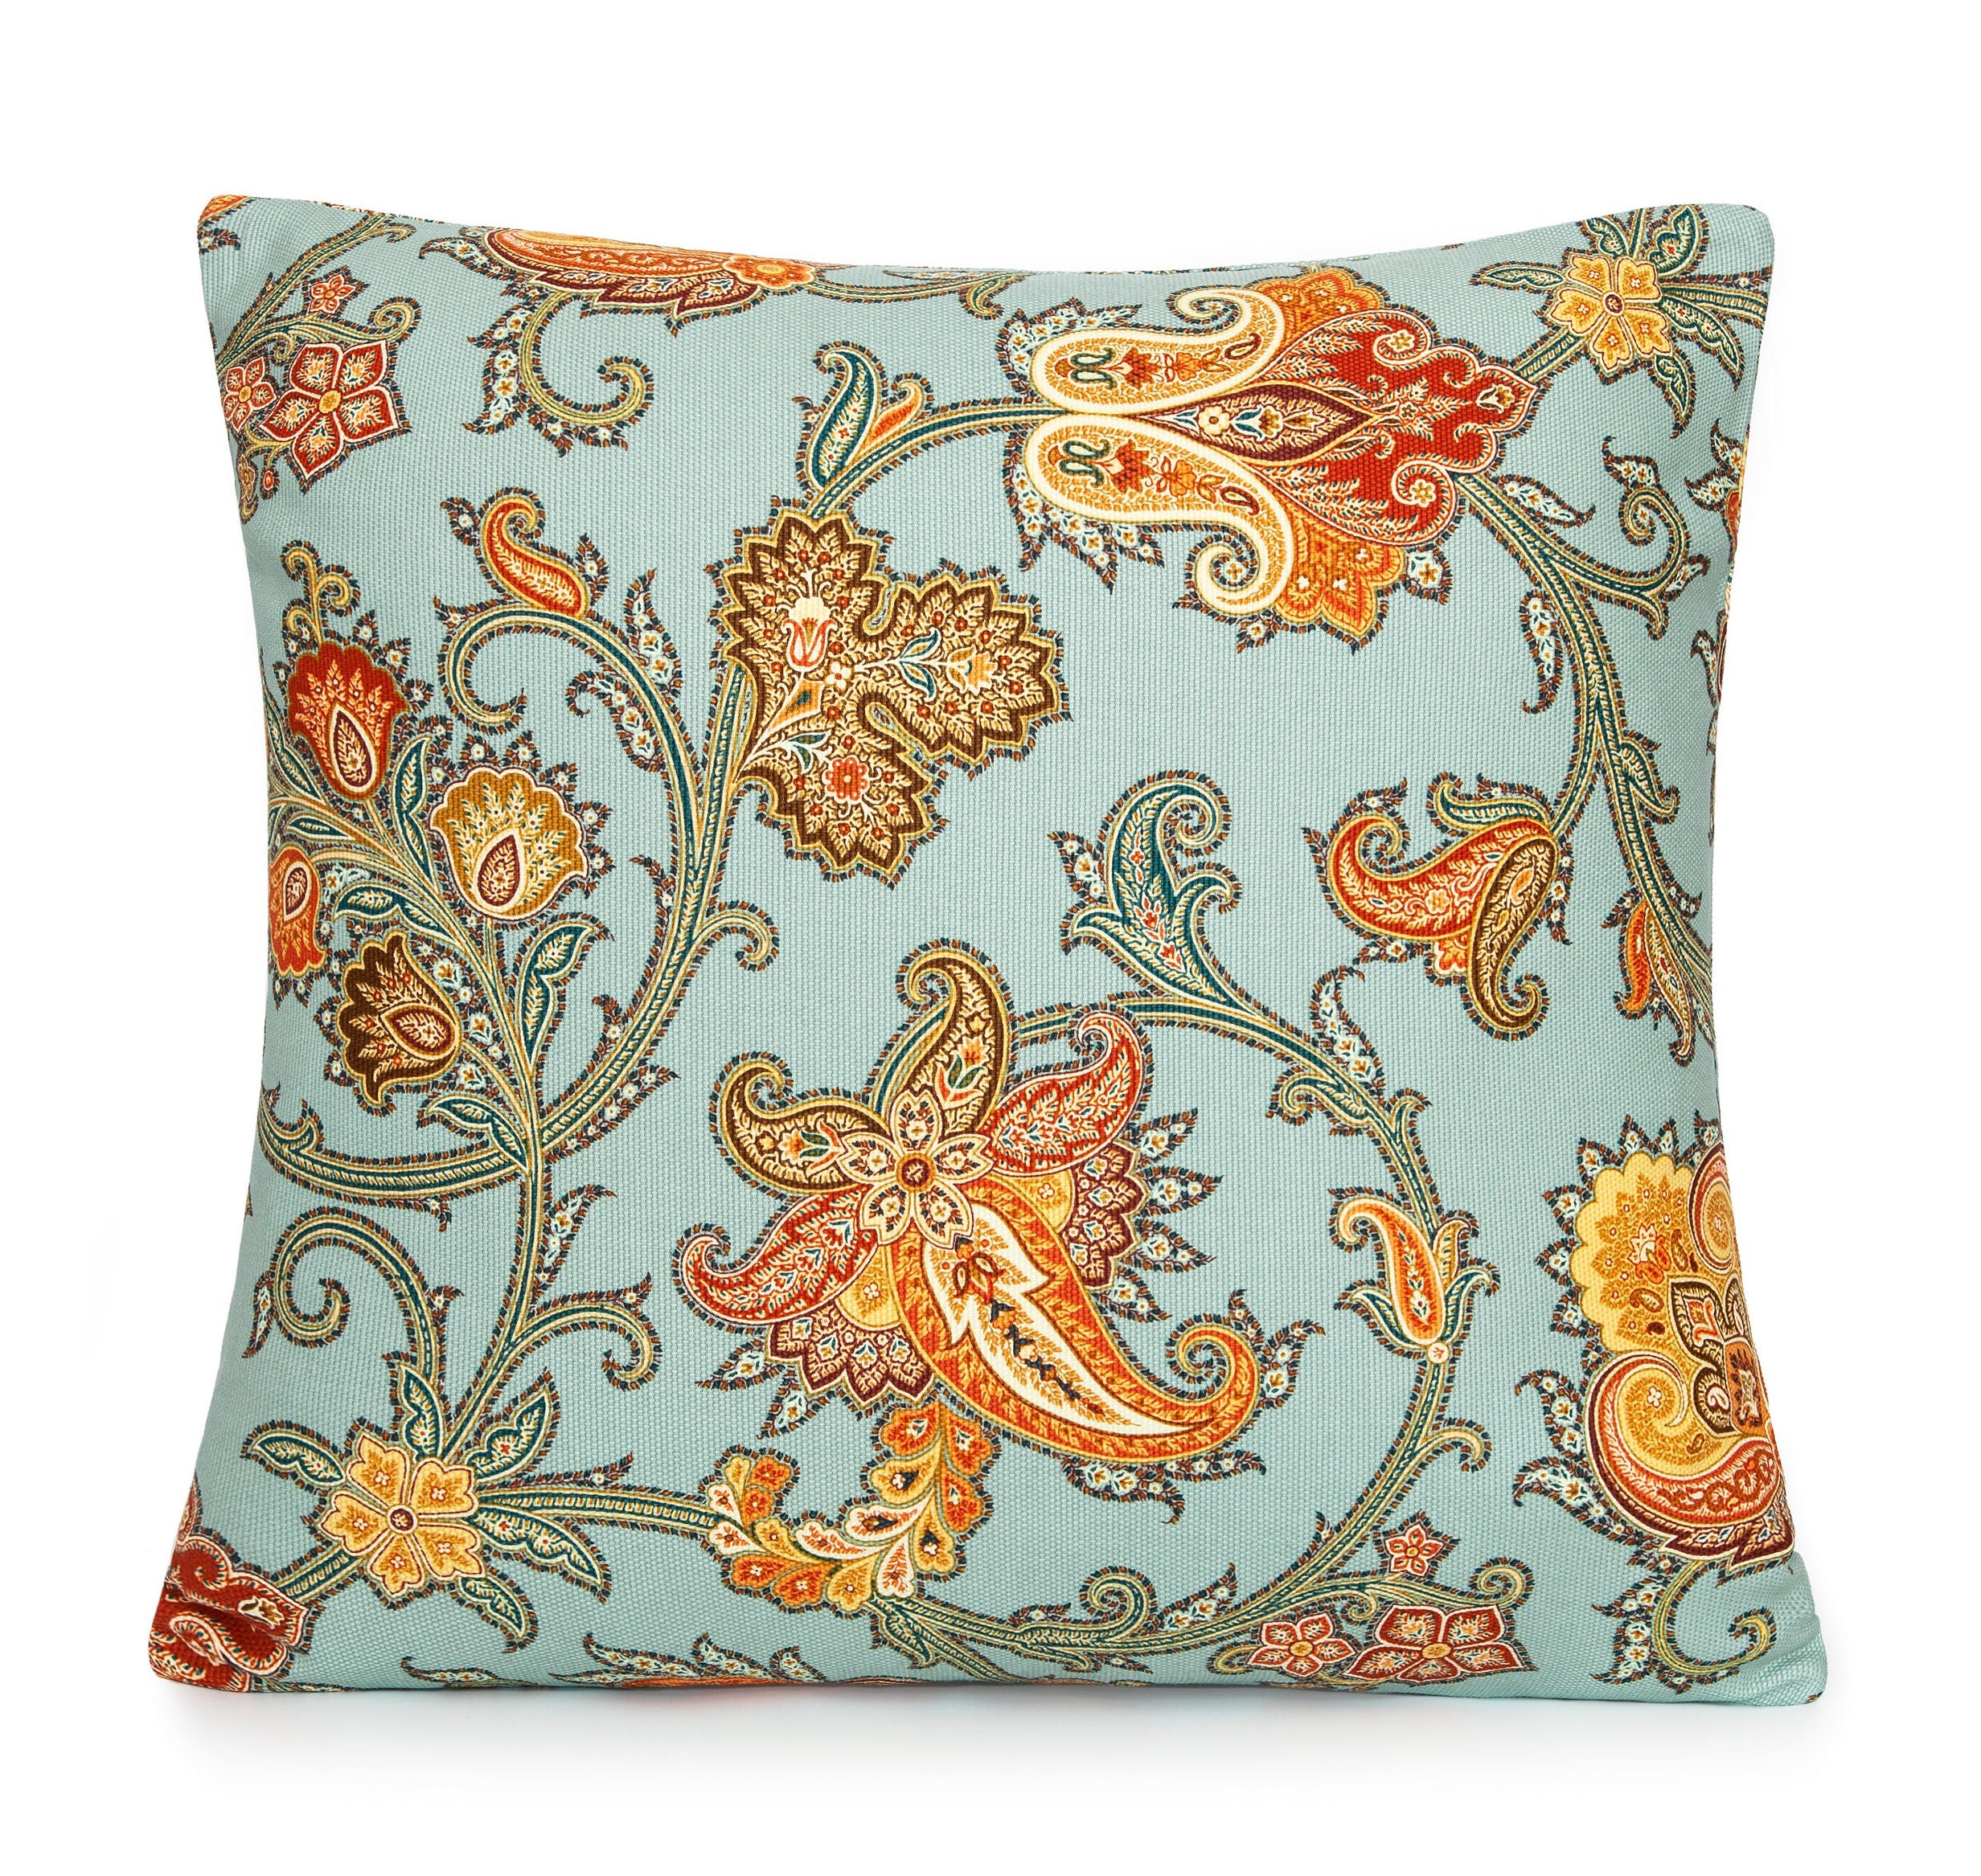 Linen Folk Motif Floral in Turquoise Decorative Pillow Cover. - Etsy